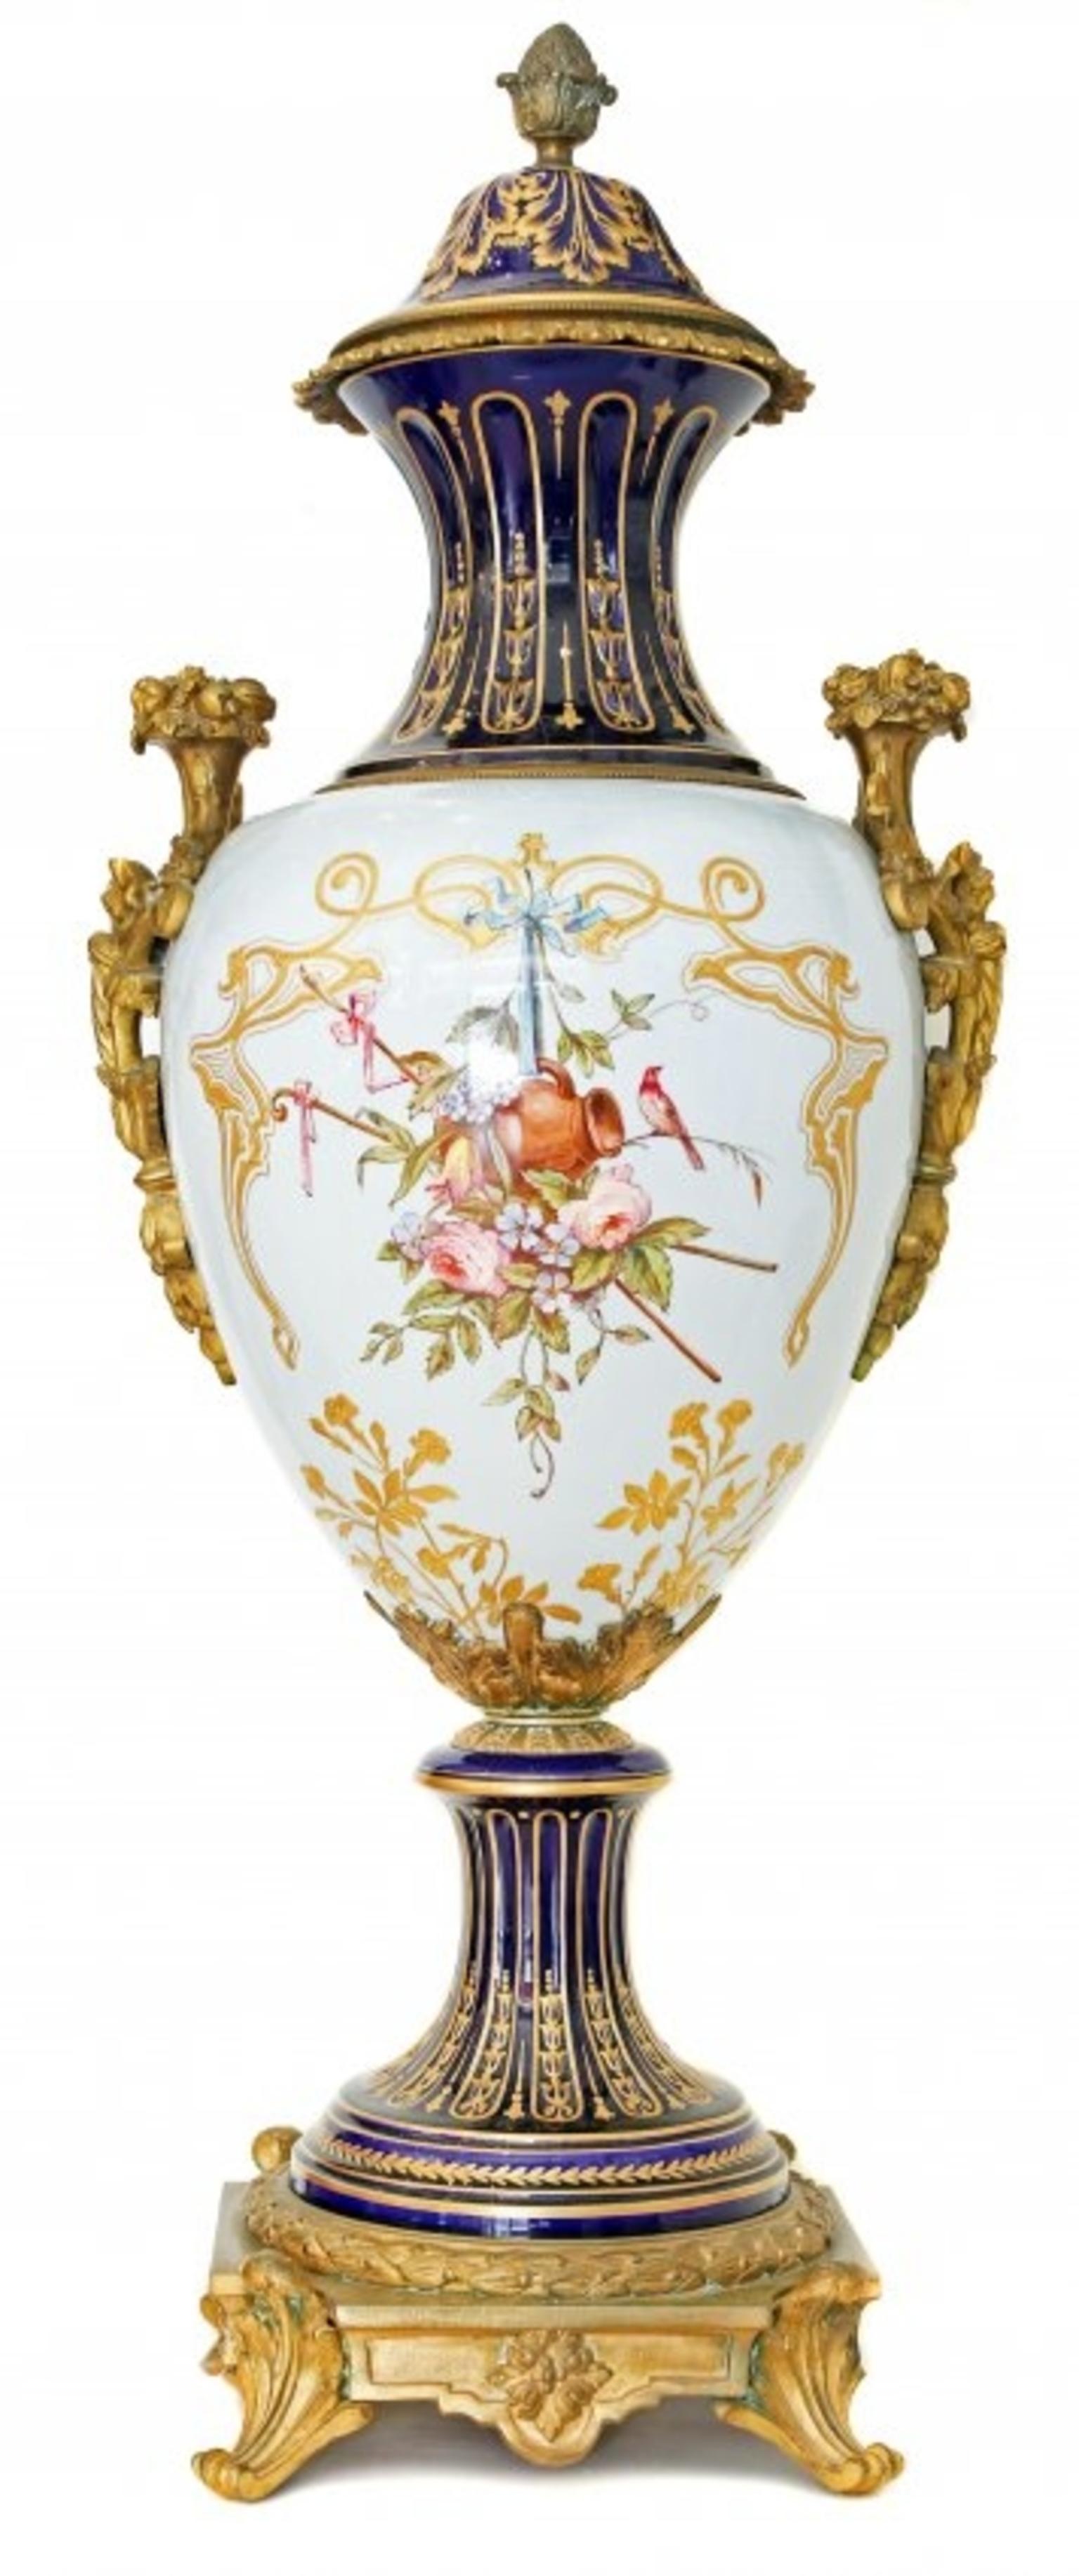 Fine pair of 'Sèvres' gilt bronze-mounted painted and parcel gilt porcelain covered vases
late 19th century, Paris, the painting by Poitevin,
the baluster sky blue and cobalt ground vessels painted in the Art Nouveau taste; with fluted necks above